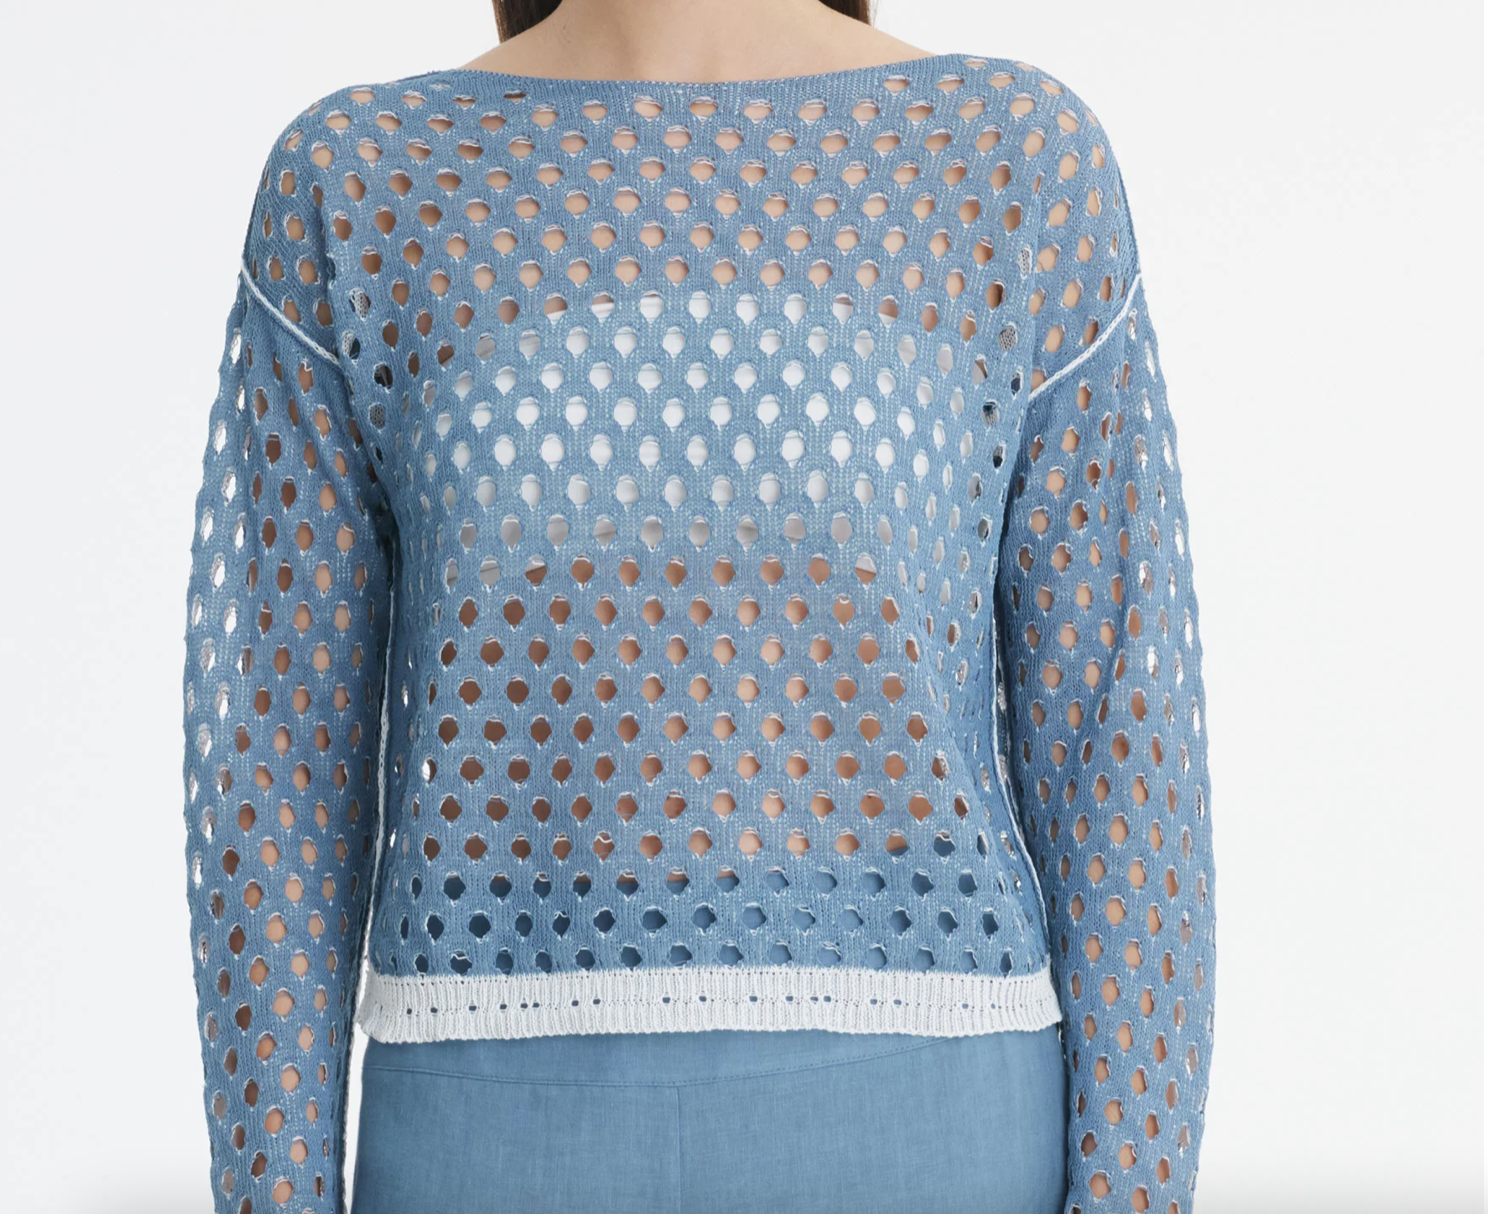 SARAH PACINI MESH SWEATER STEAL BLUE MADE IN ITALY | 24111047-43